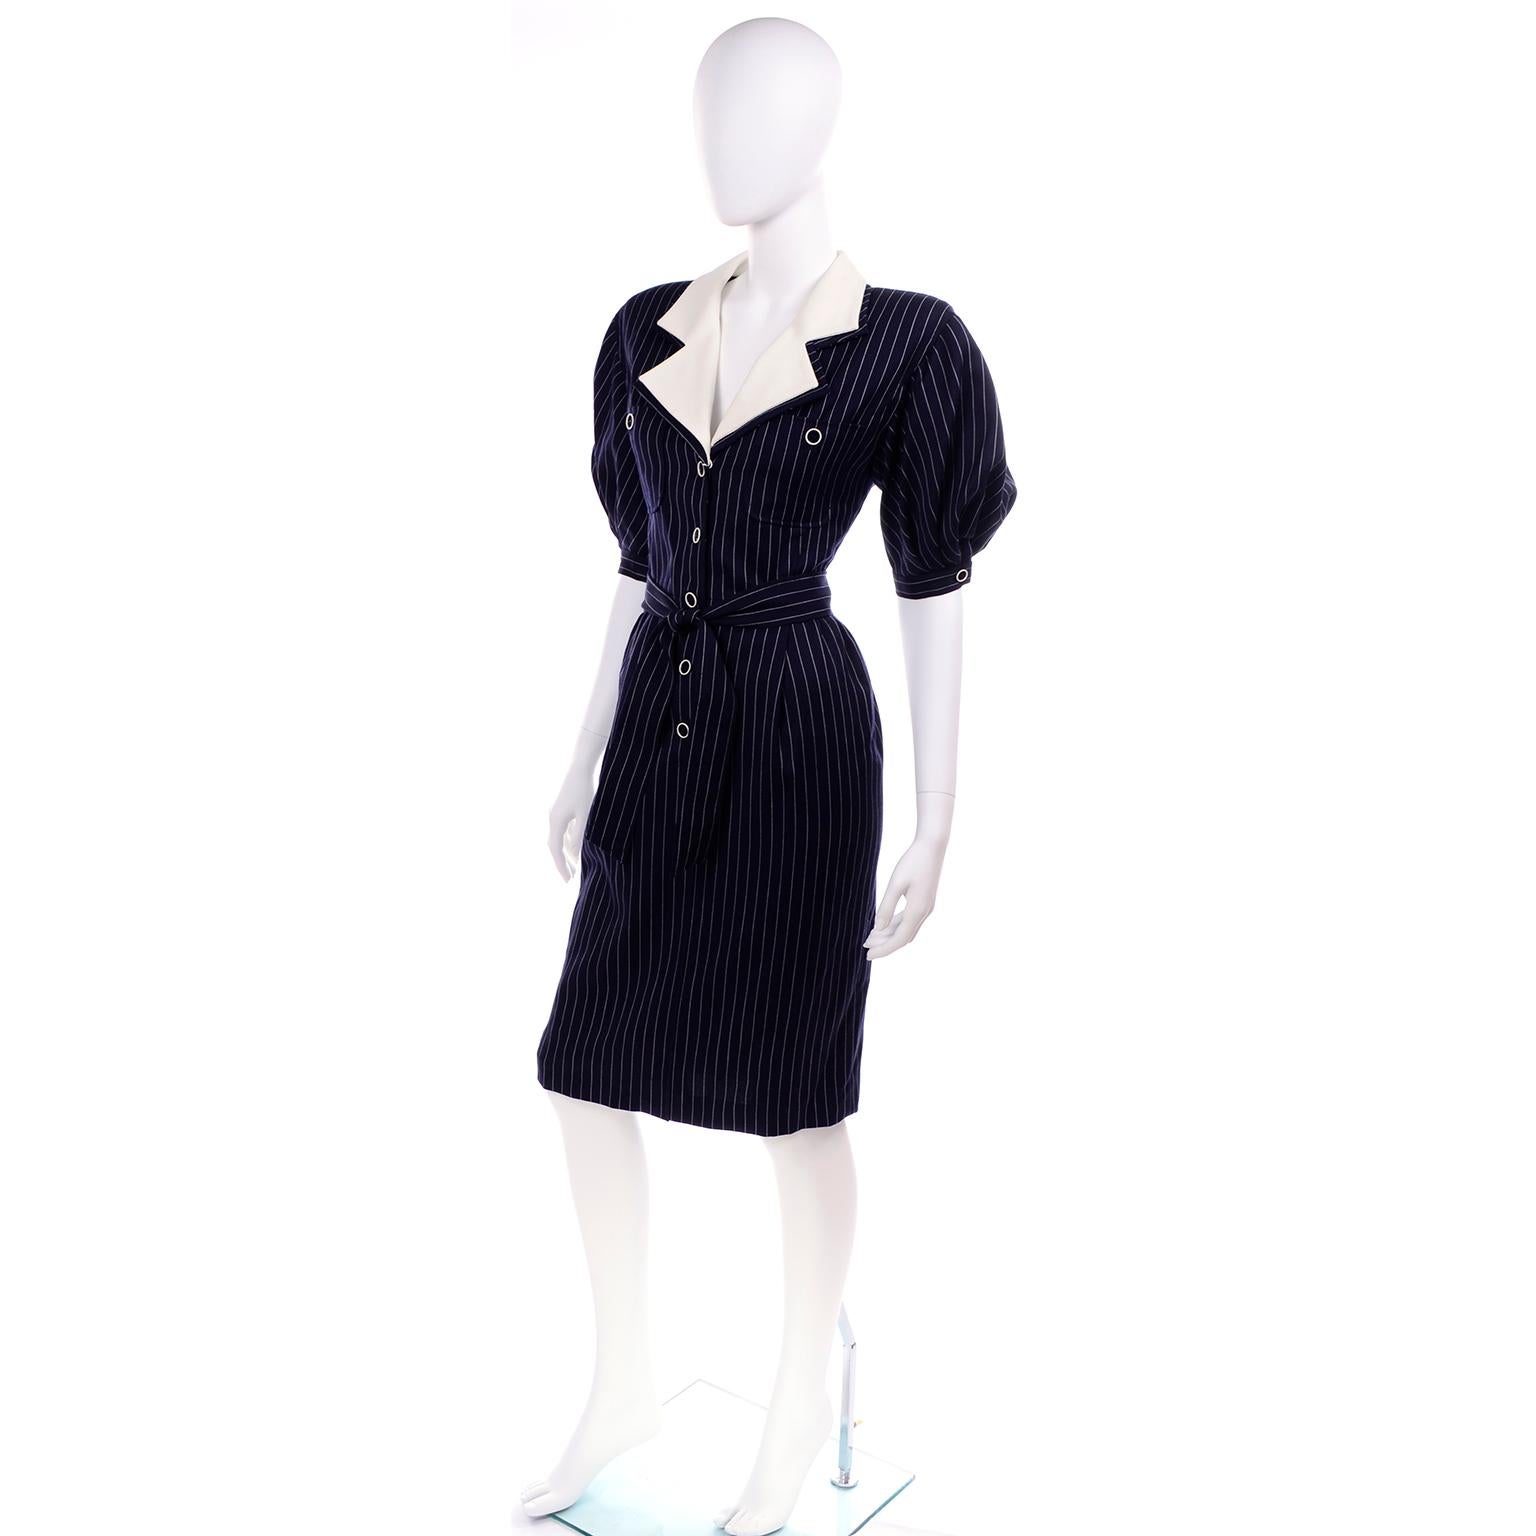 Black New Ungaro Deadstock Vintage Dress in Navy Blue & White Pinstripes With Tag